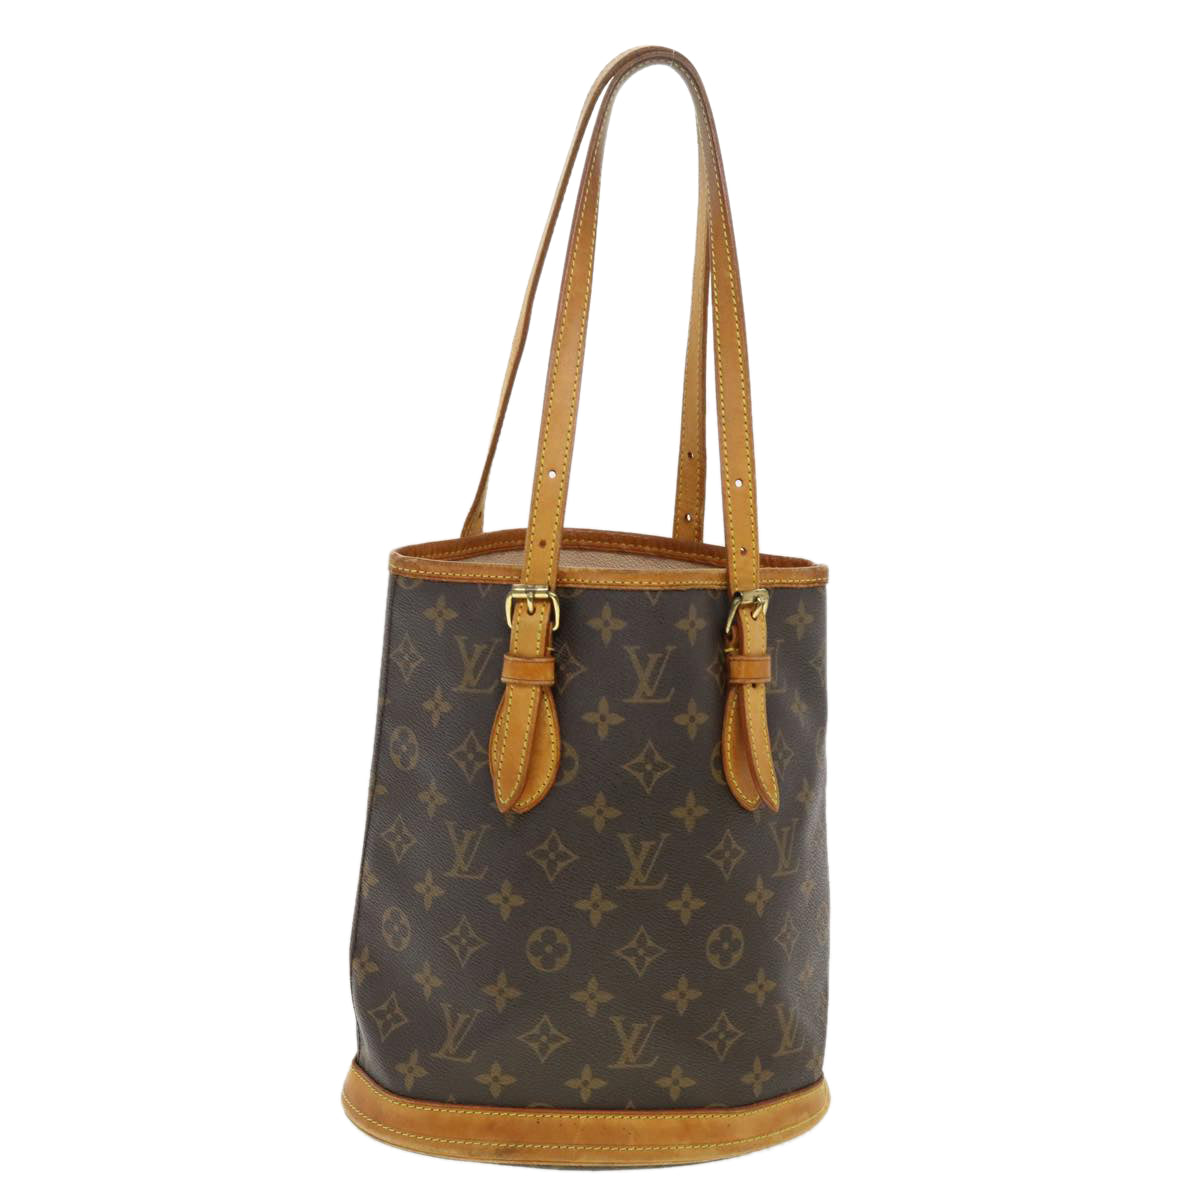 Buy [Used] LOUIS VUITTON Bucket PM Bucket Type Tote Bag with Monogram Pouch  M42238 from Japan - Buy authentic Plus exclusive items from Japan